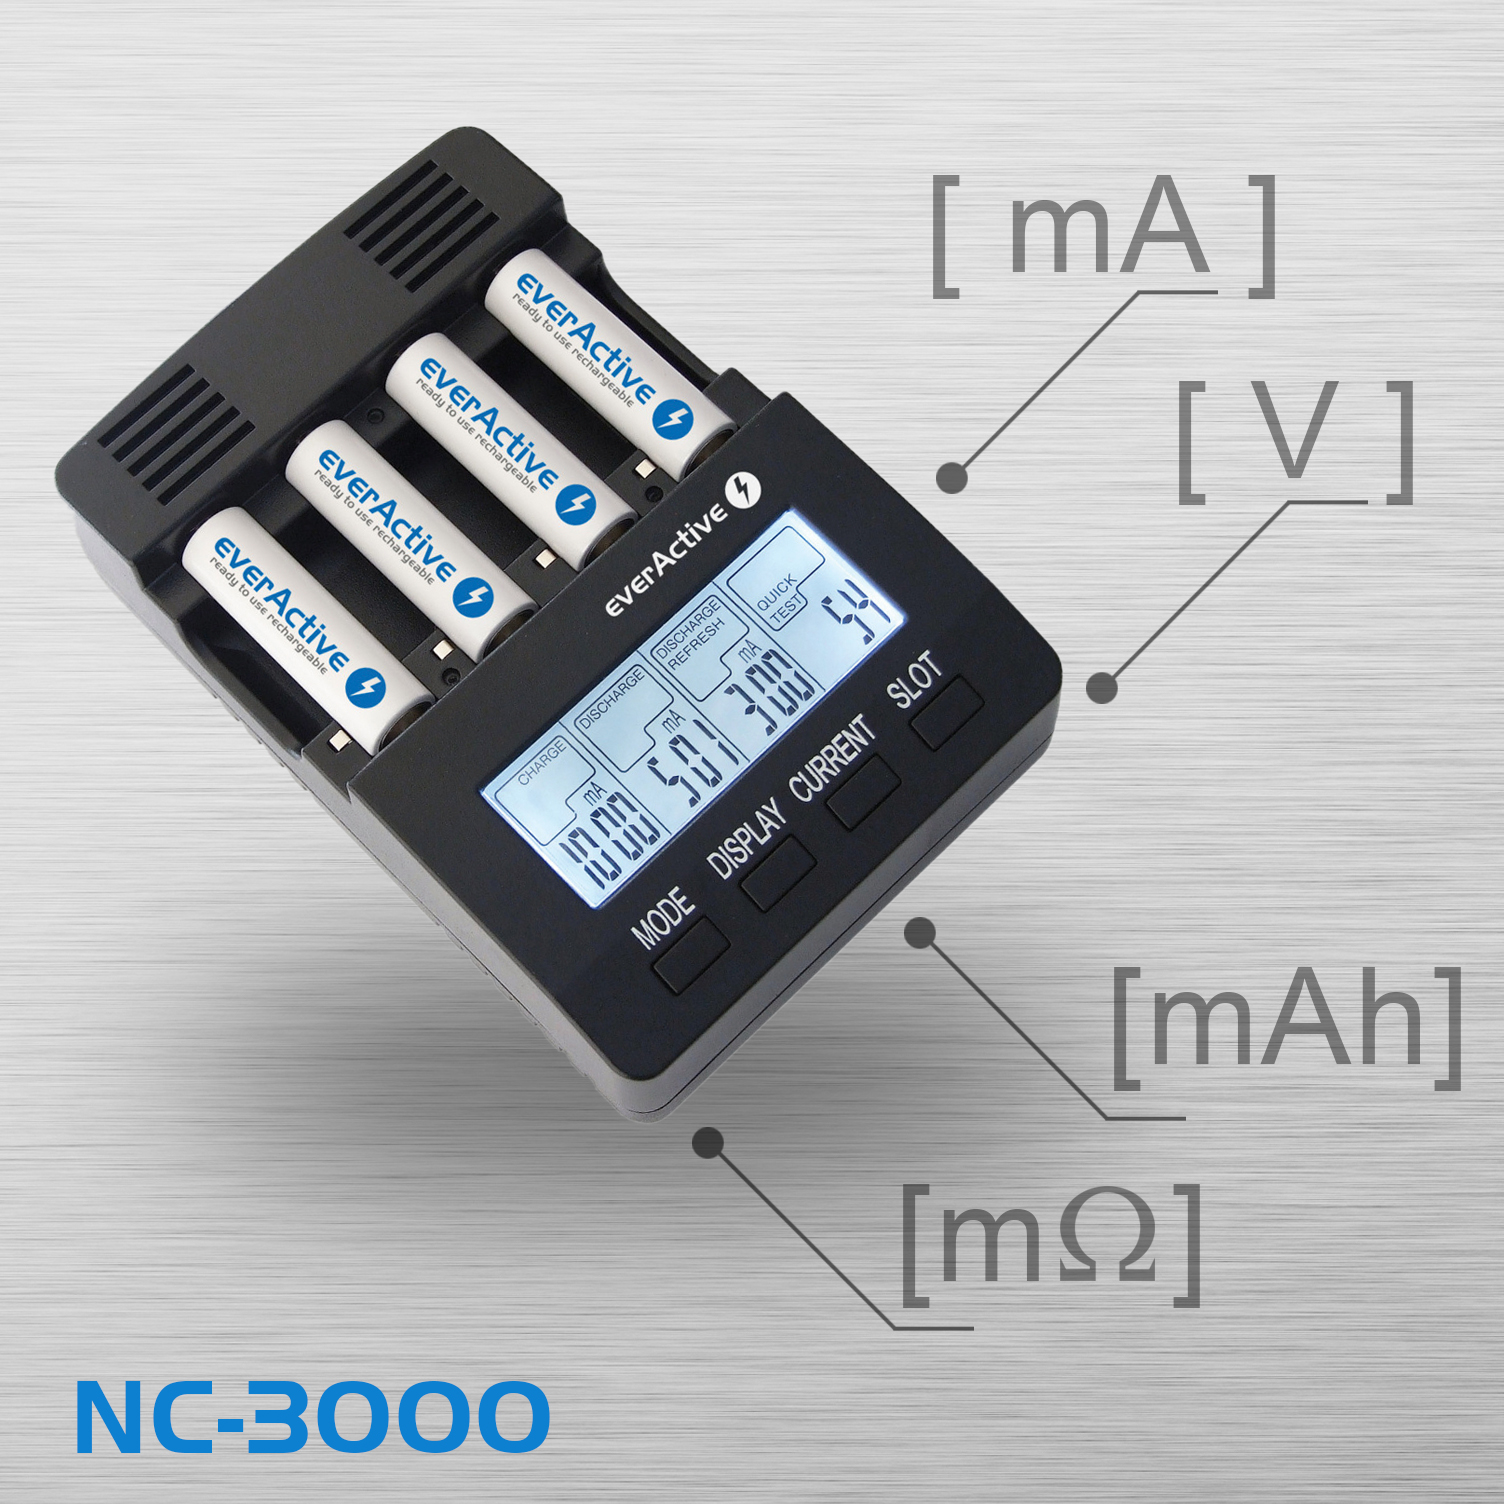 everActive NC-3000 as a battery analyzer